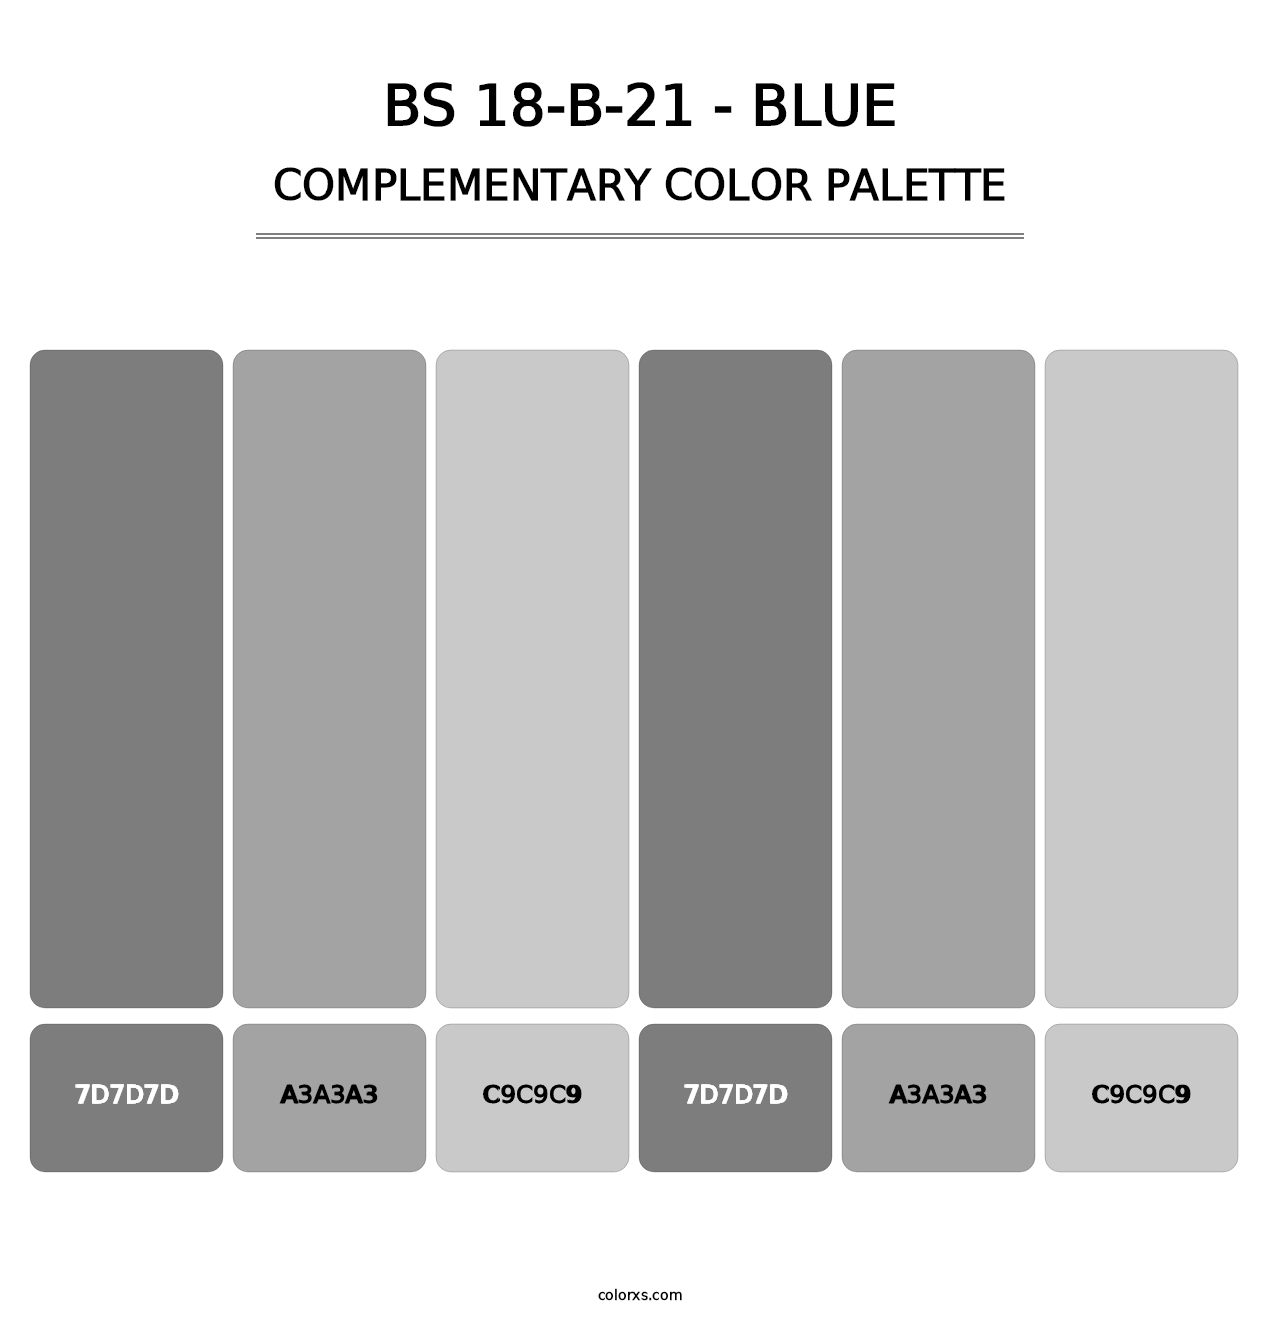 BS 18-B-21 - Blue - Complementary Color Palette